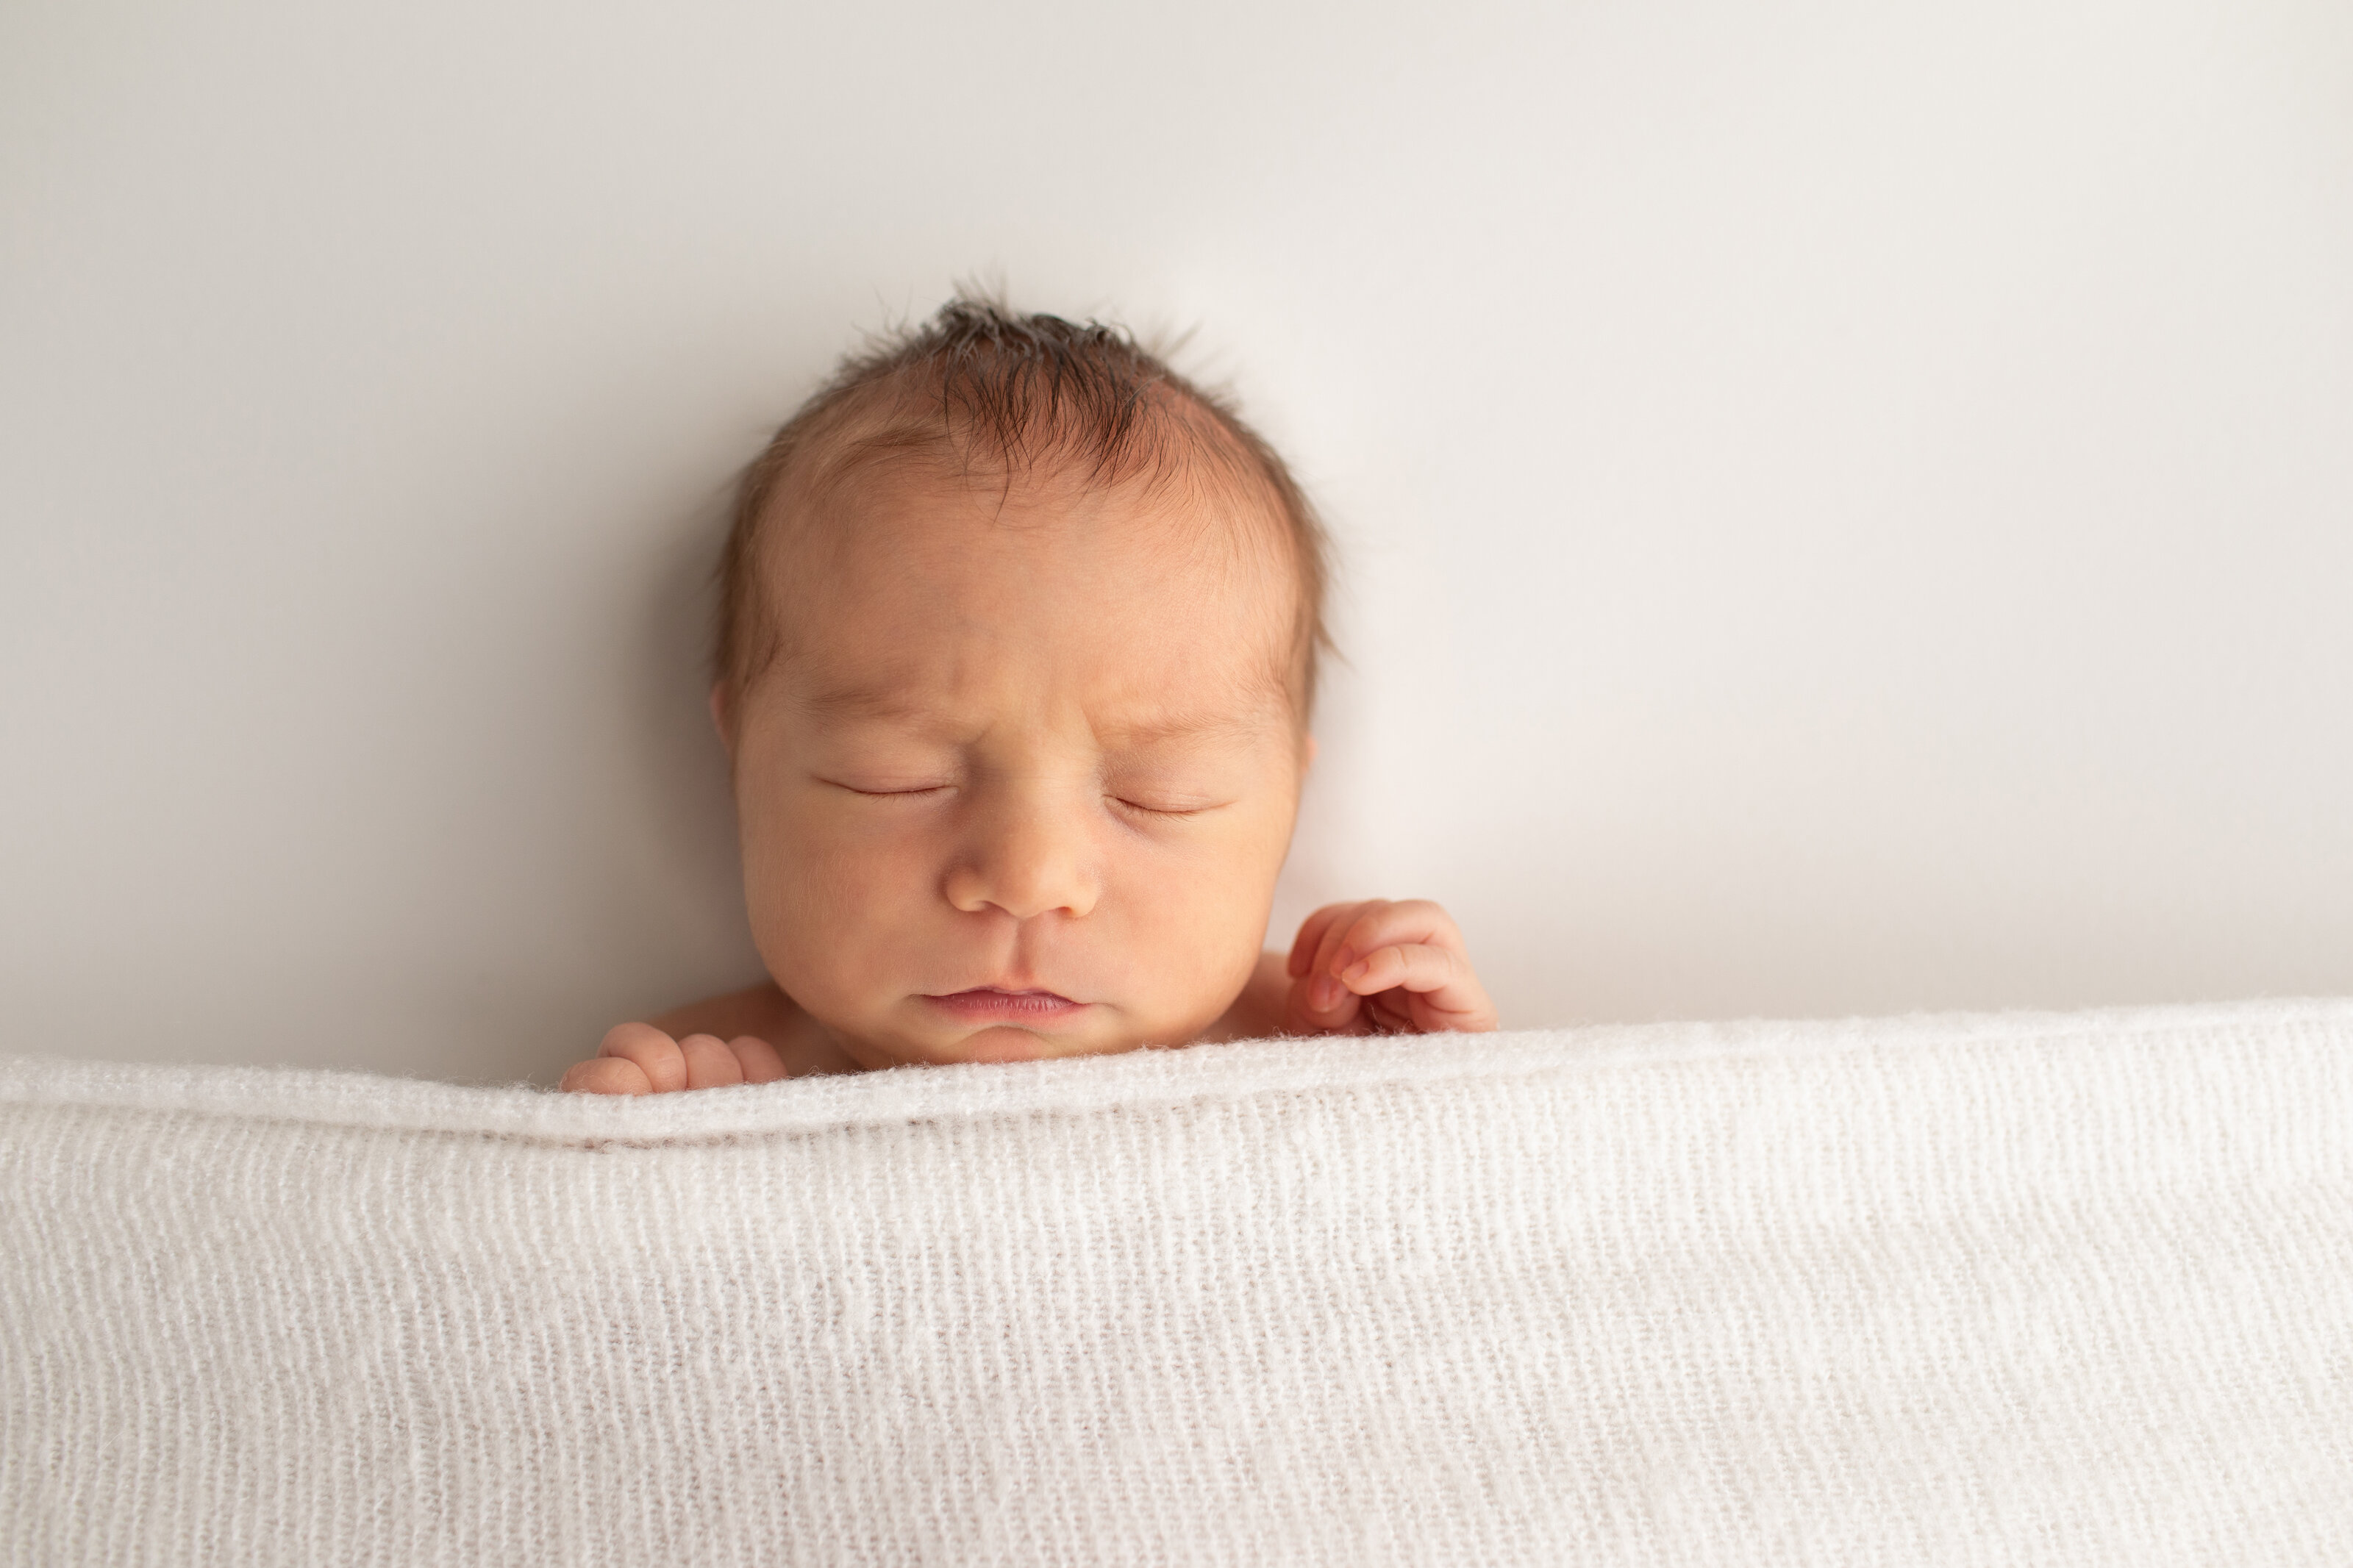 Sleeping baby boy with blanket covering him for newborn photography columbia md session